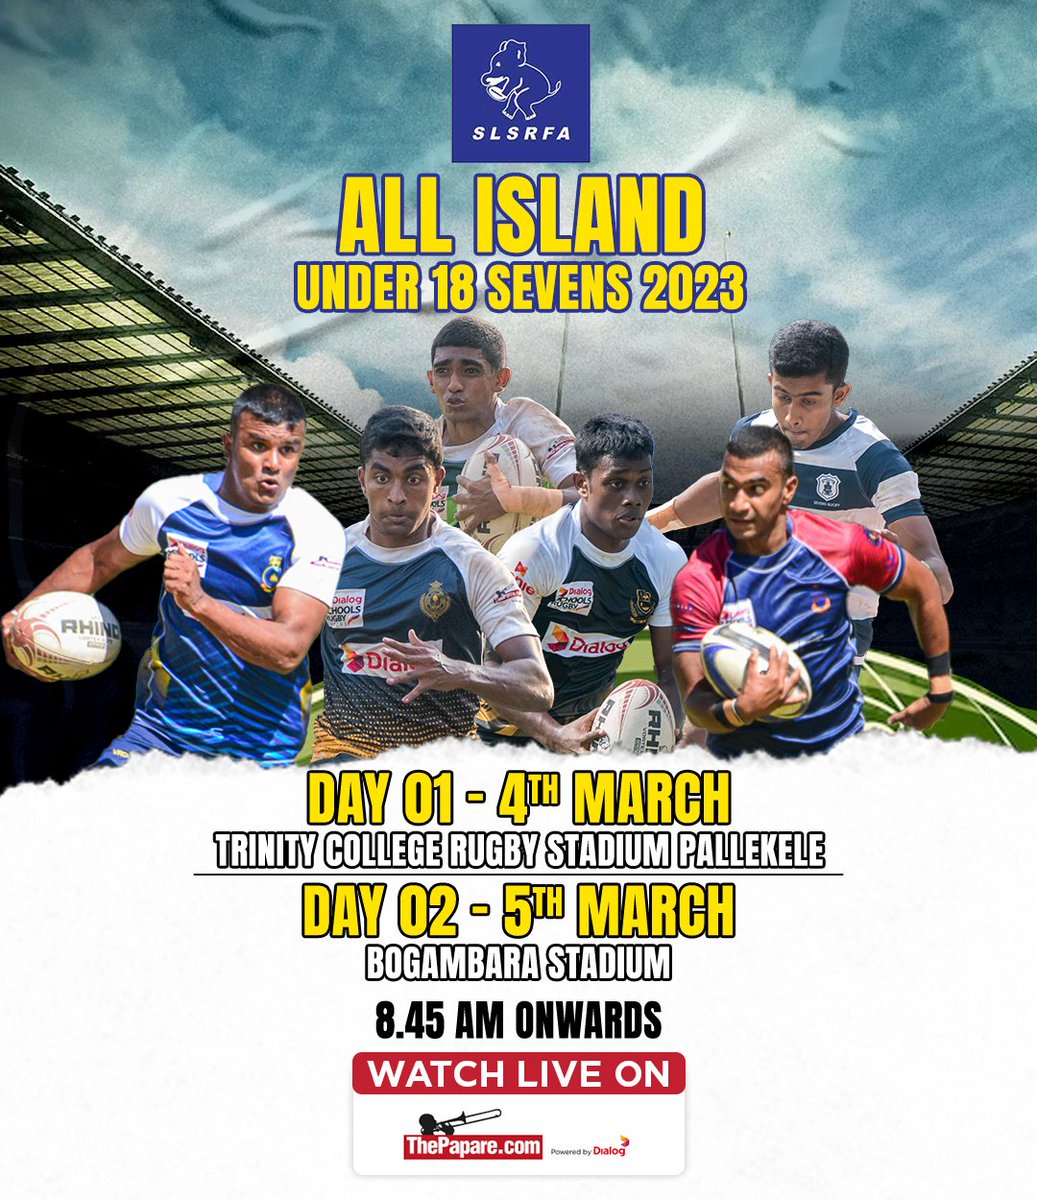 SLSRFA All Island Under 18 Division 1 Schools Rugby 7s, will be played on 4th & 5th March in Kandy. #School7s

Catch the action LIVE on ThePapare.com, 8:30 am onwards: live.thepapare.com